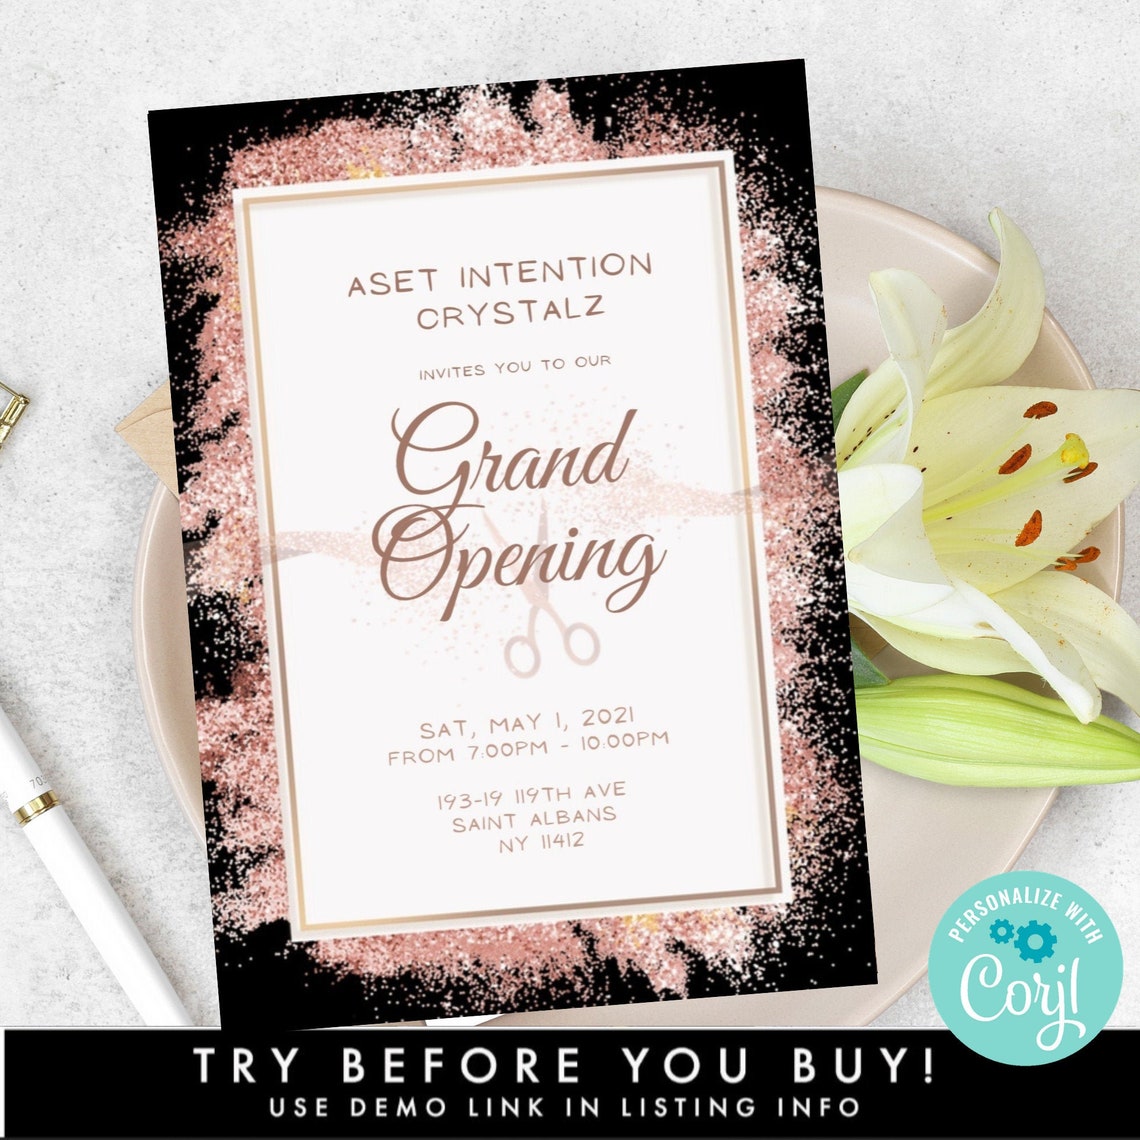 Electronic Grand Opening Launch Party Invitation Template | Etsy